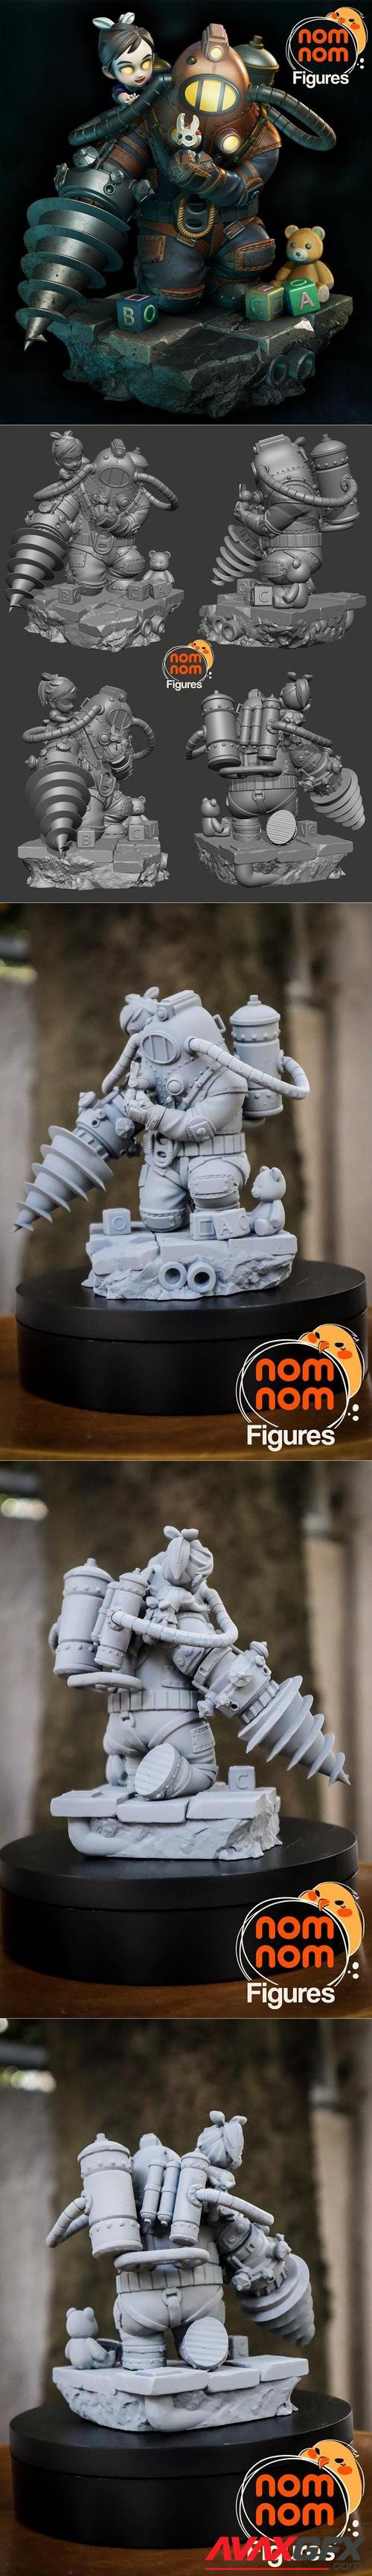 Chibi Big Daddy and Little Sister from Bioshock – 3D Print